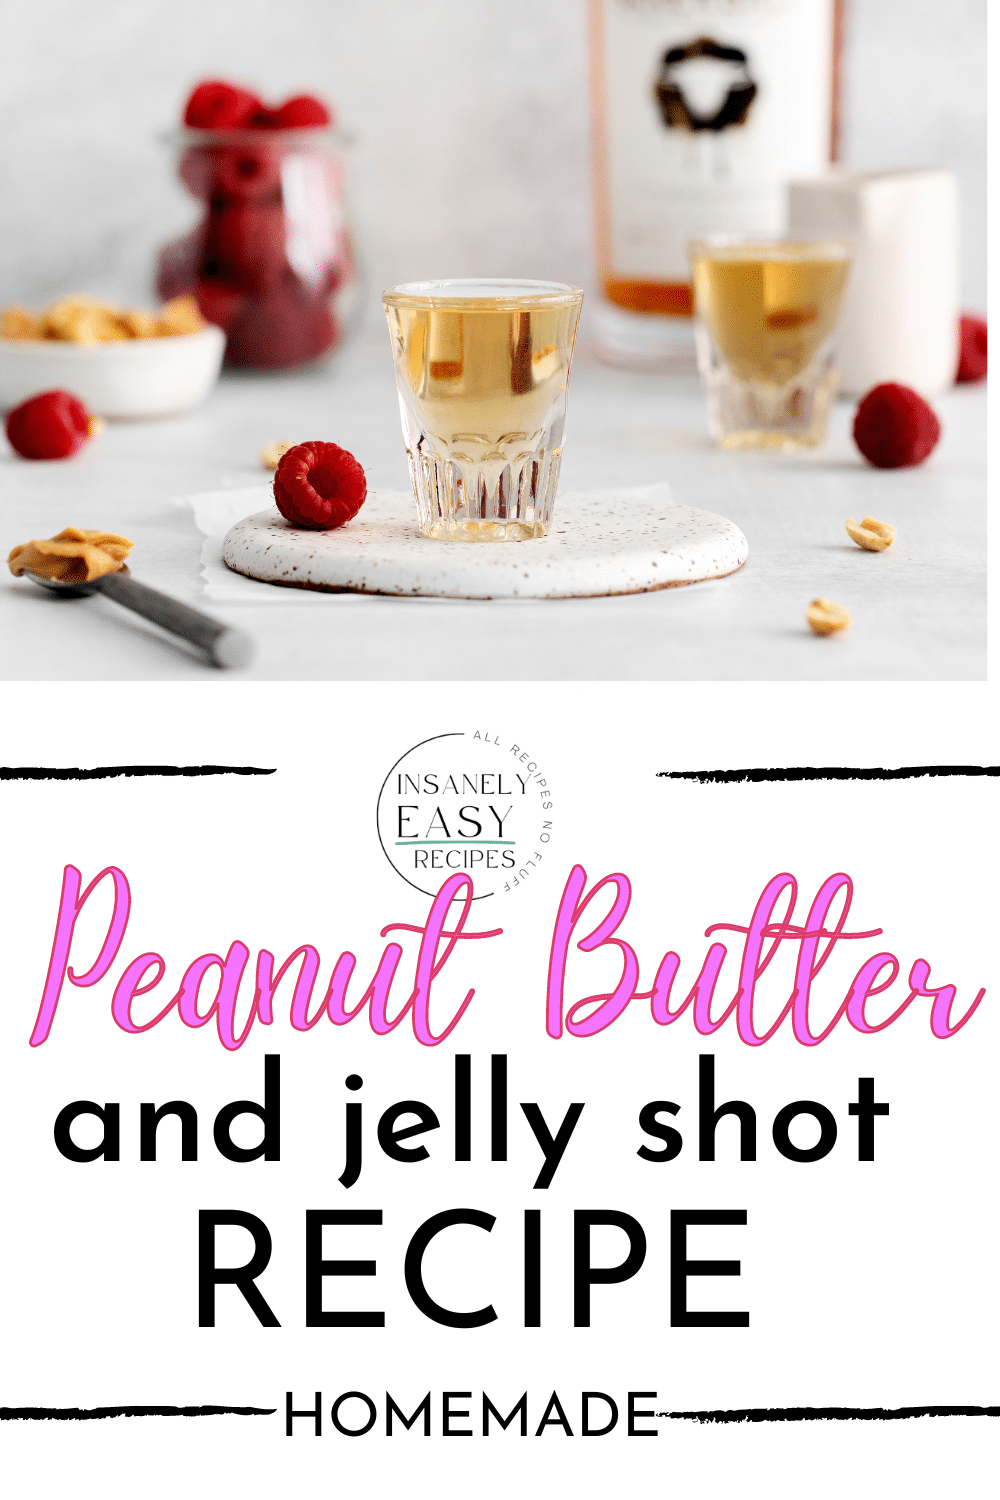 action shot showing how to make a peanut butter and jelly shot. Text box overlay says Peanut Butter and Jelly Shot Recipe